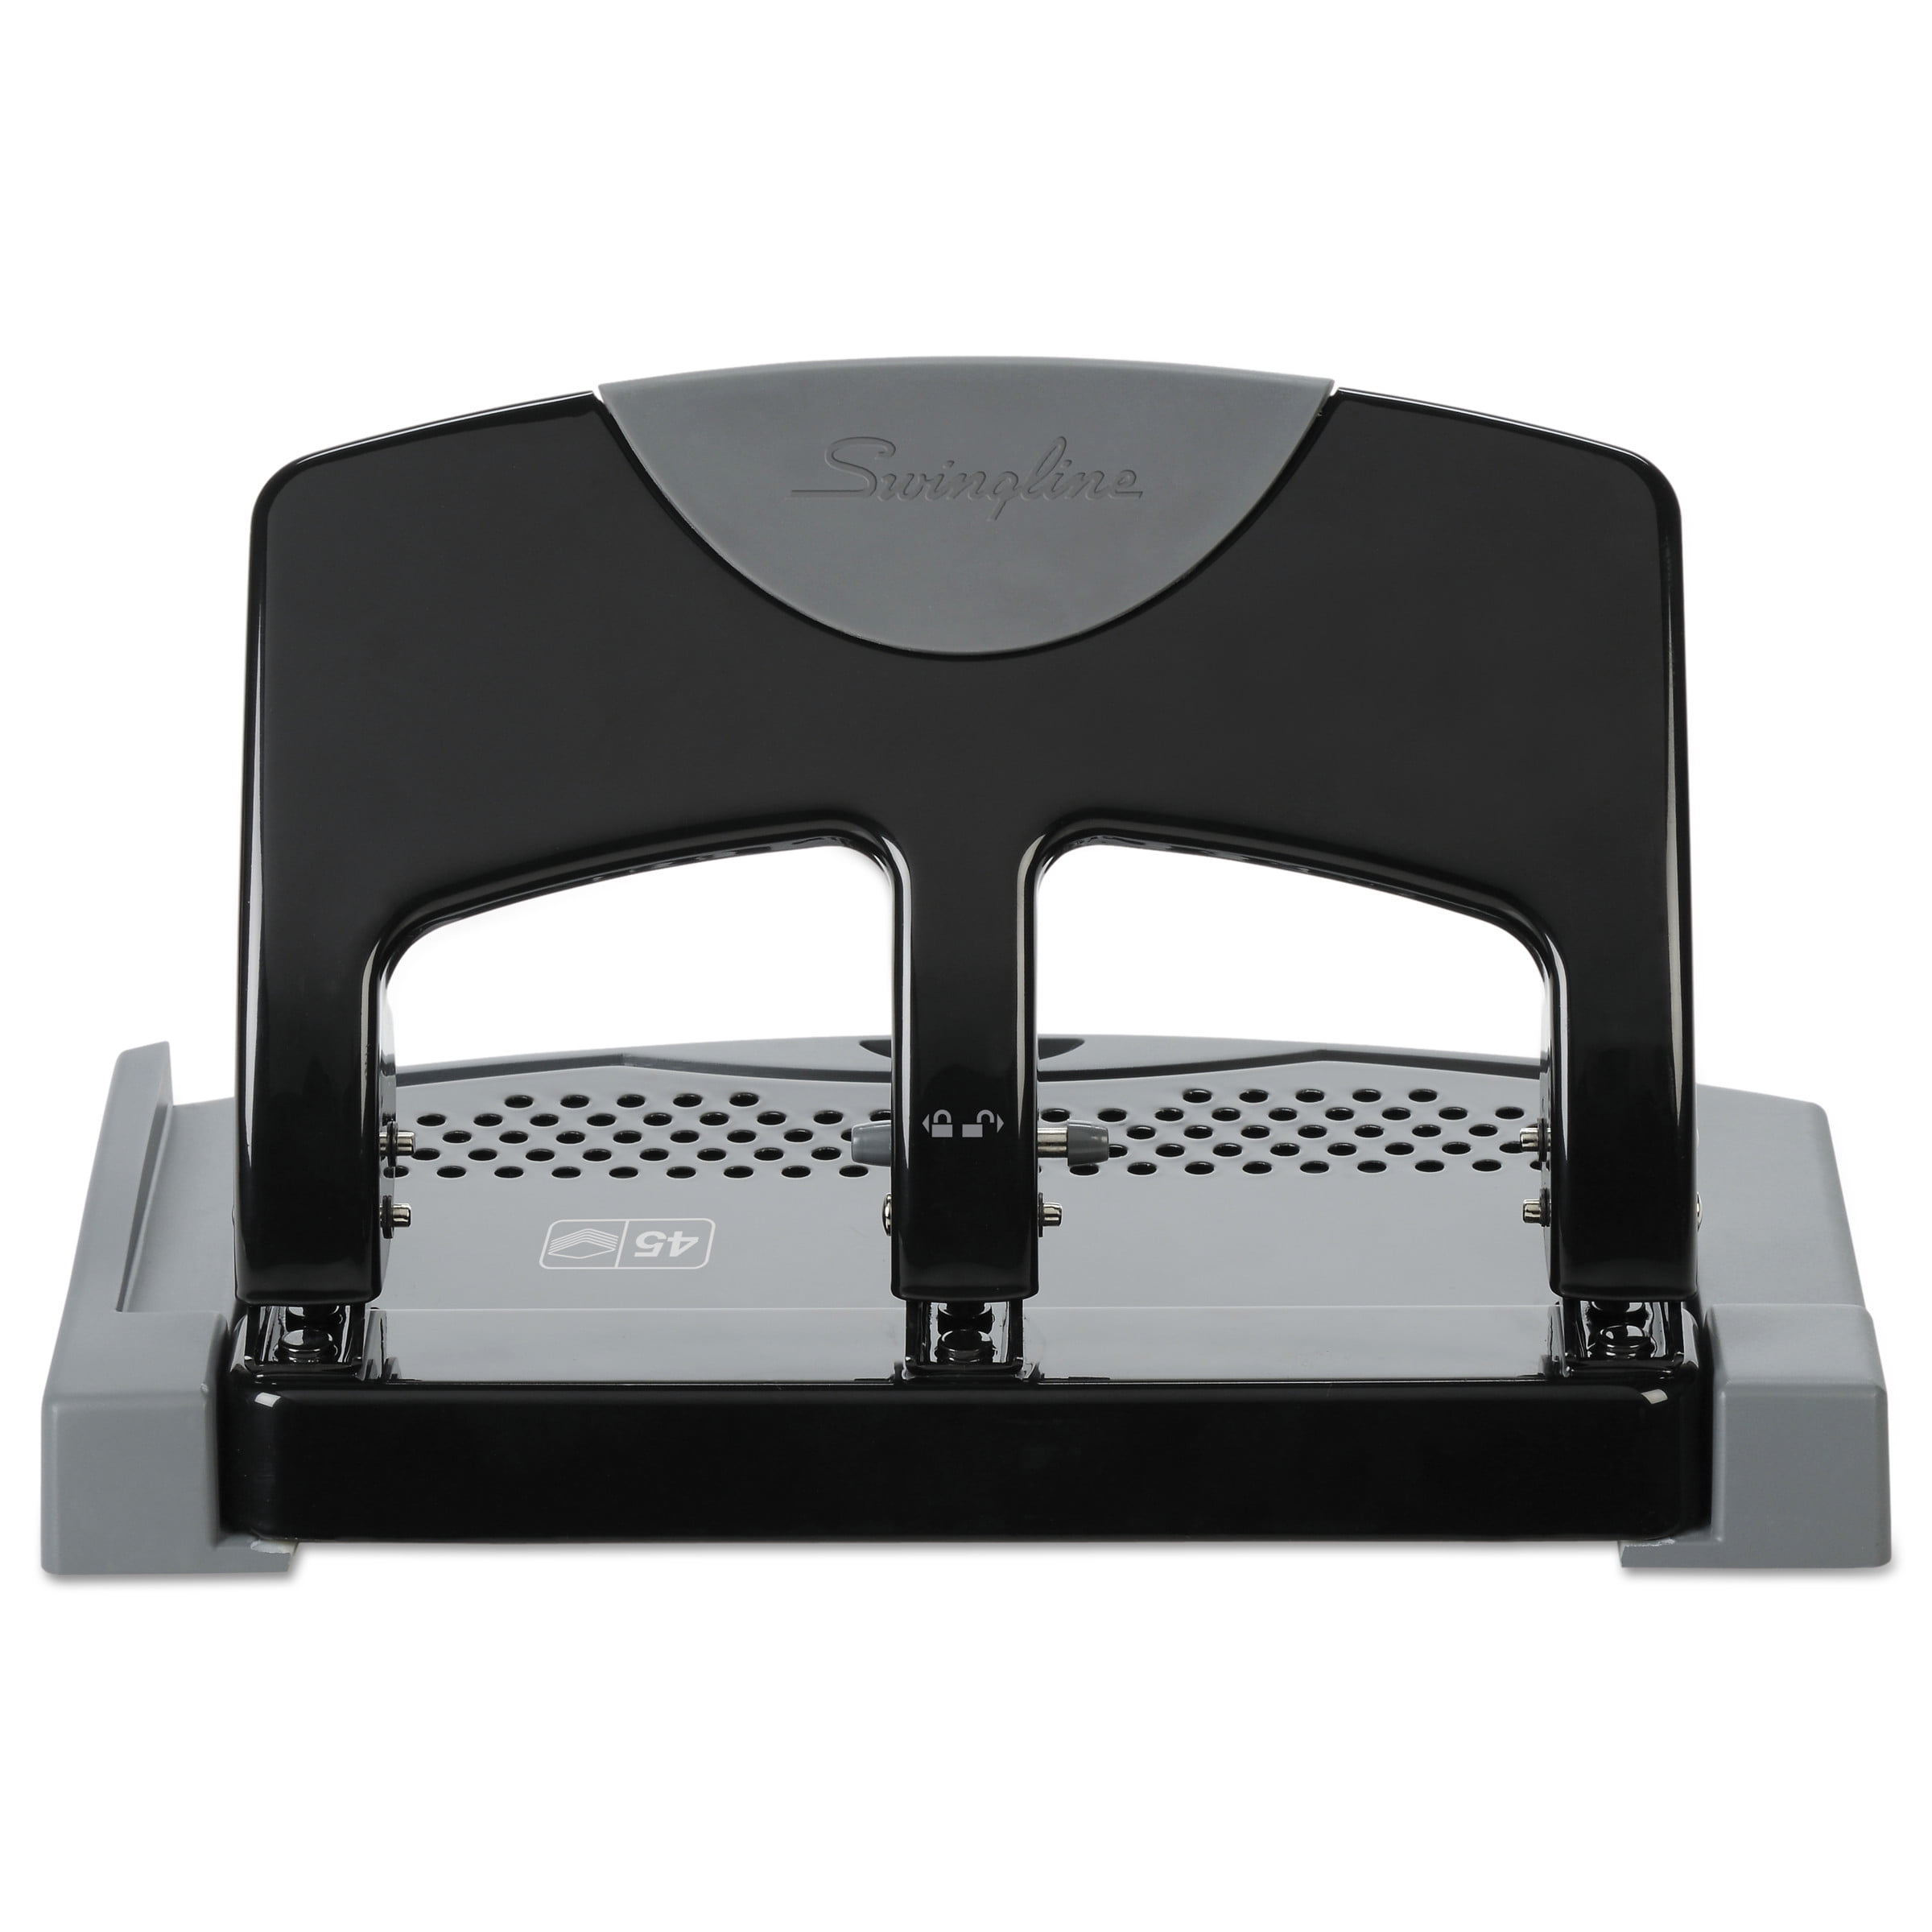 Swingline Smart Touch Compact 3 Hole Paper Punch, 20 Sheet